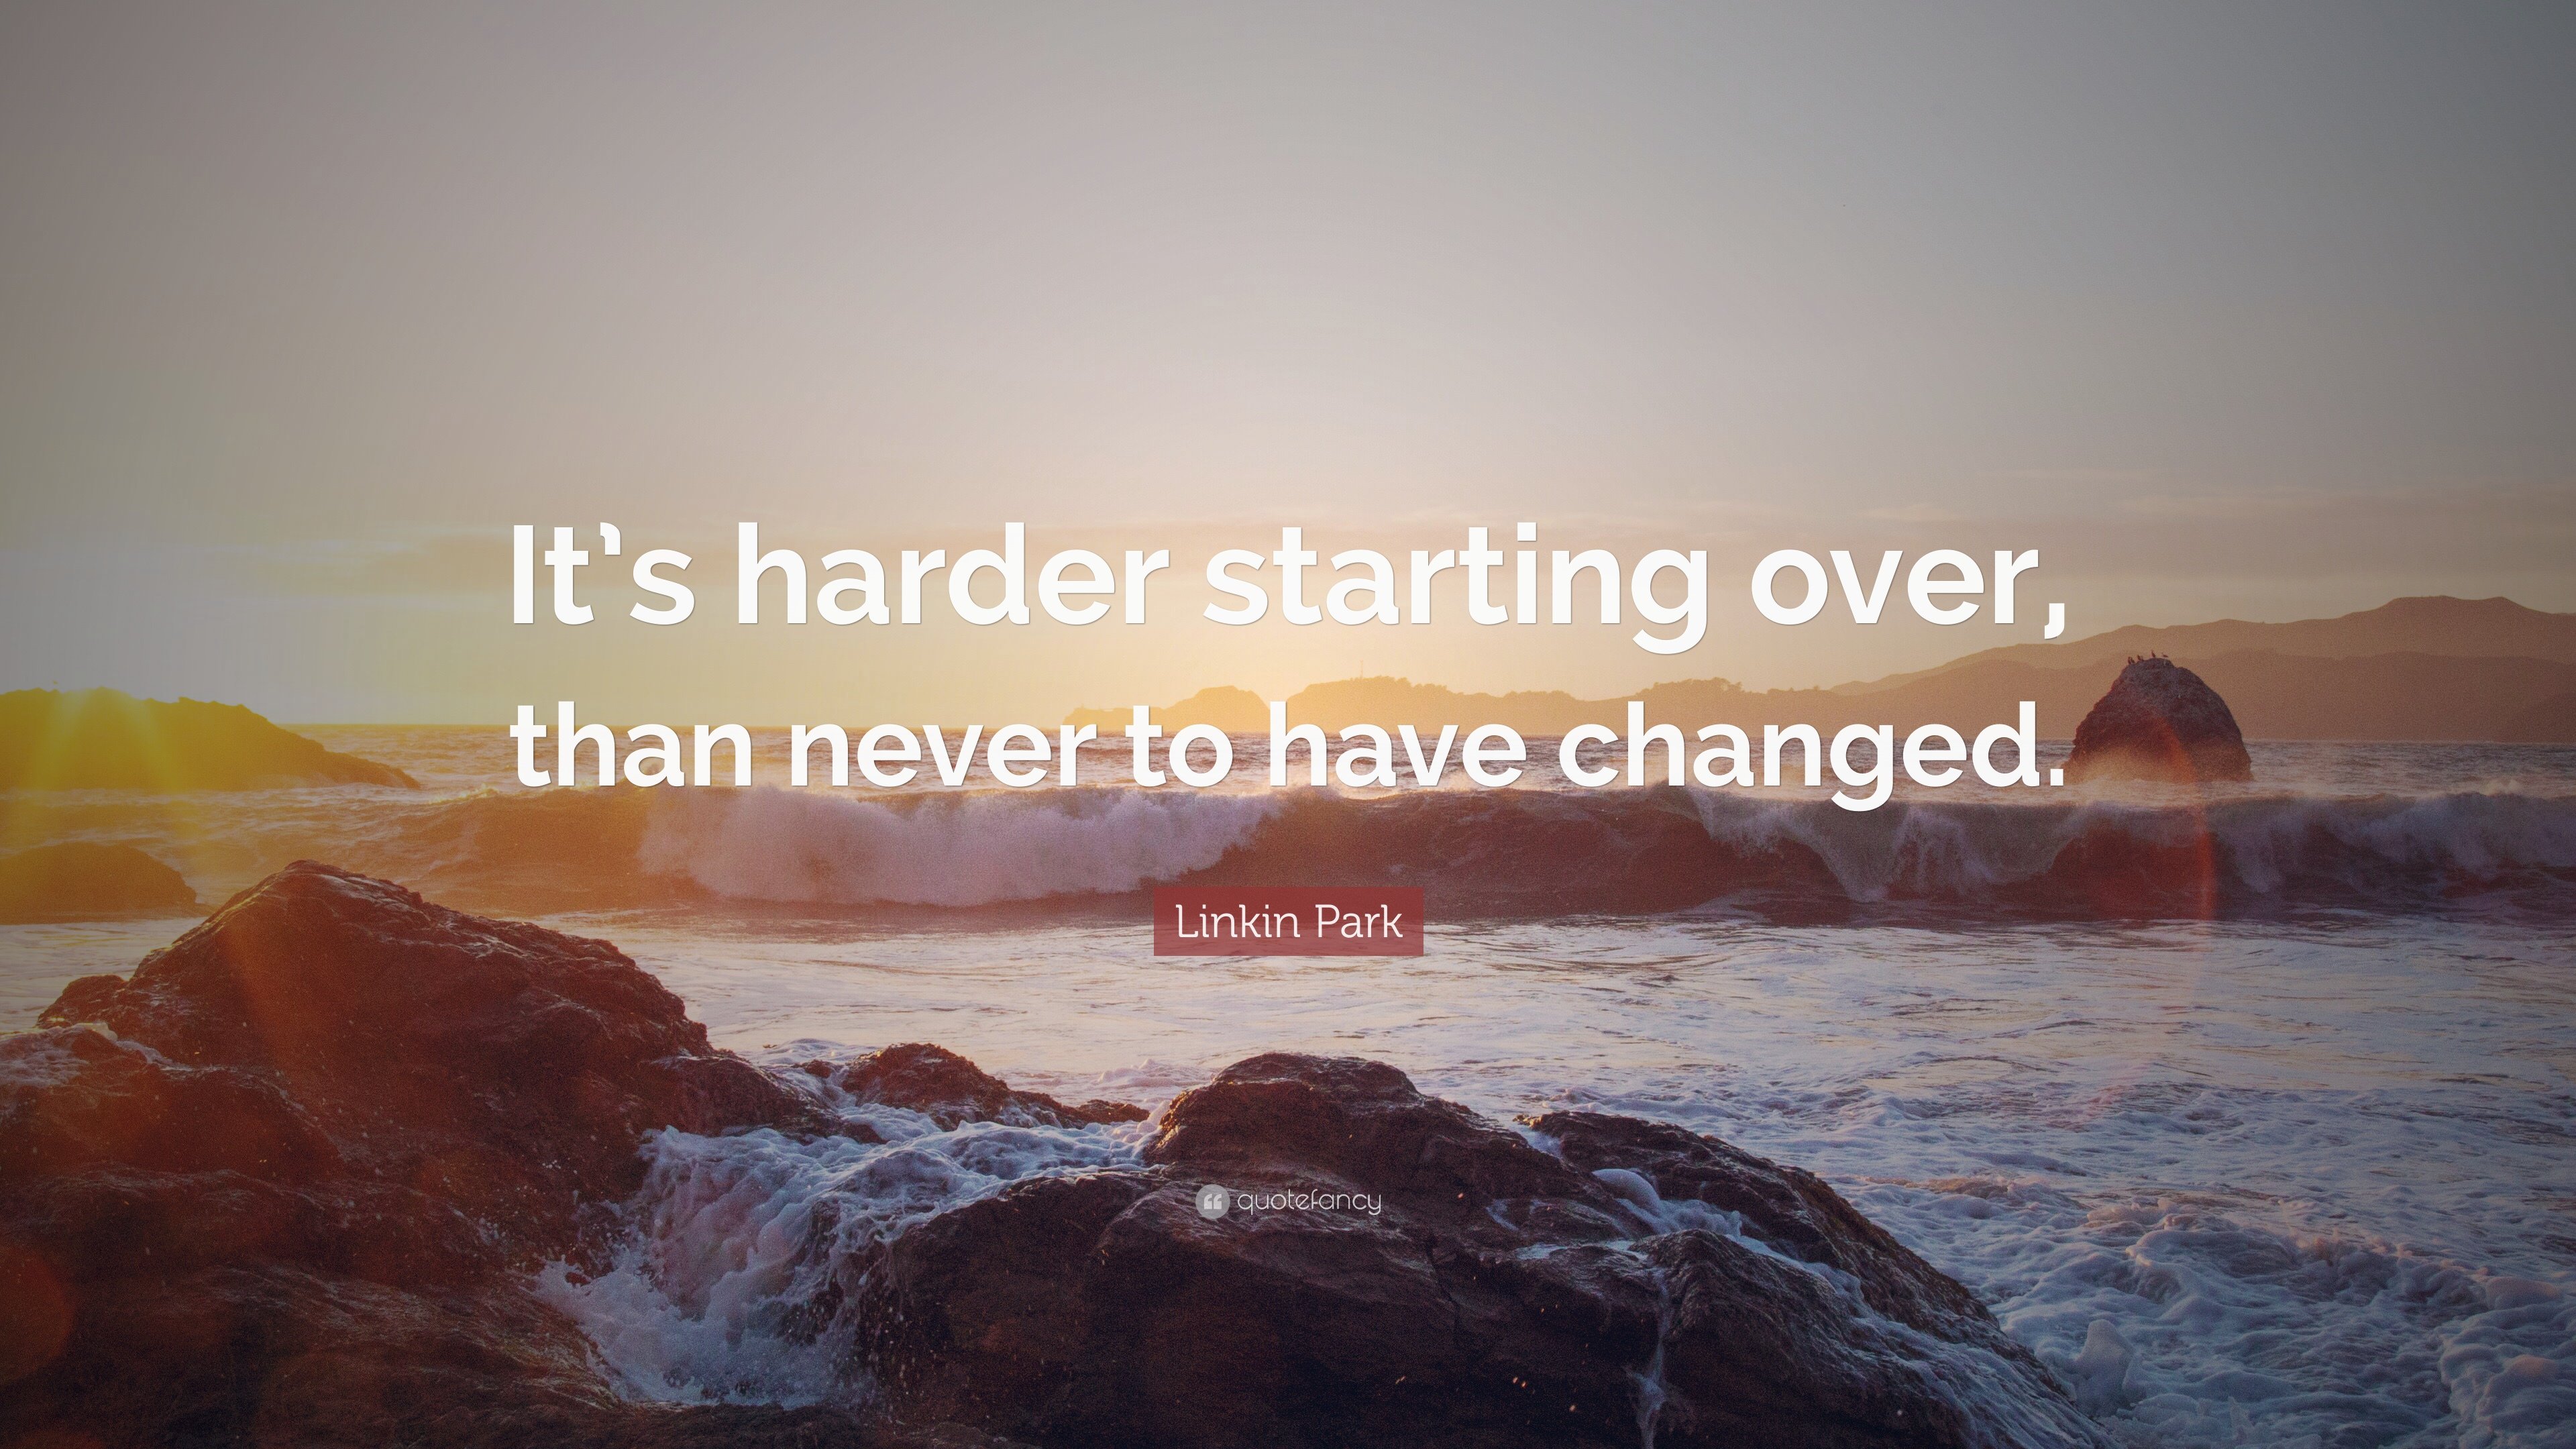 Linkin Park Quote: “It's harder starting over, than never to